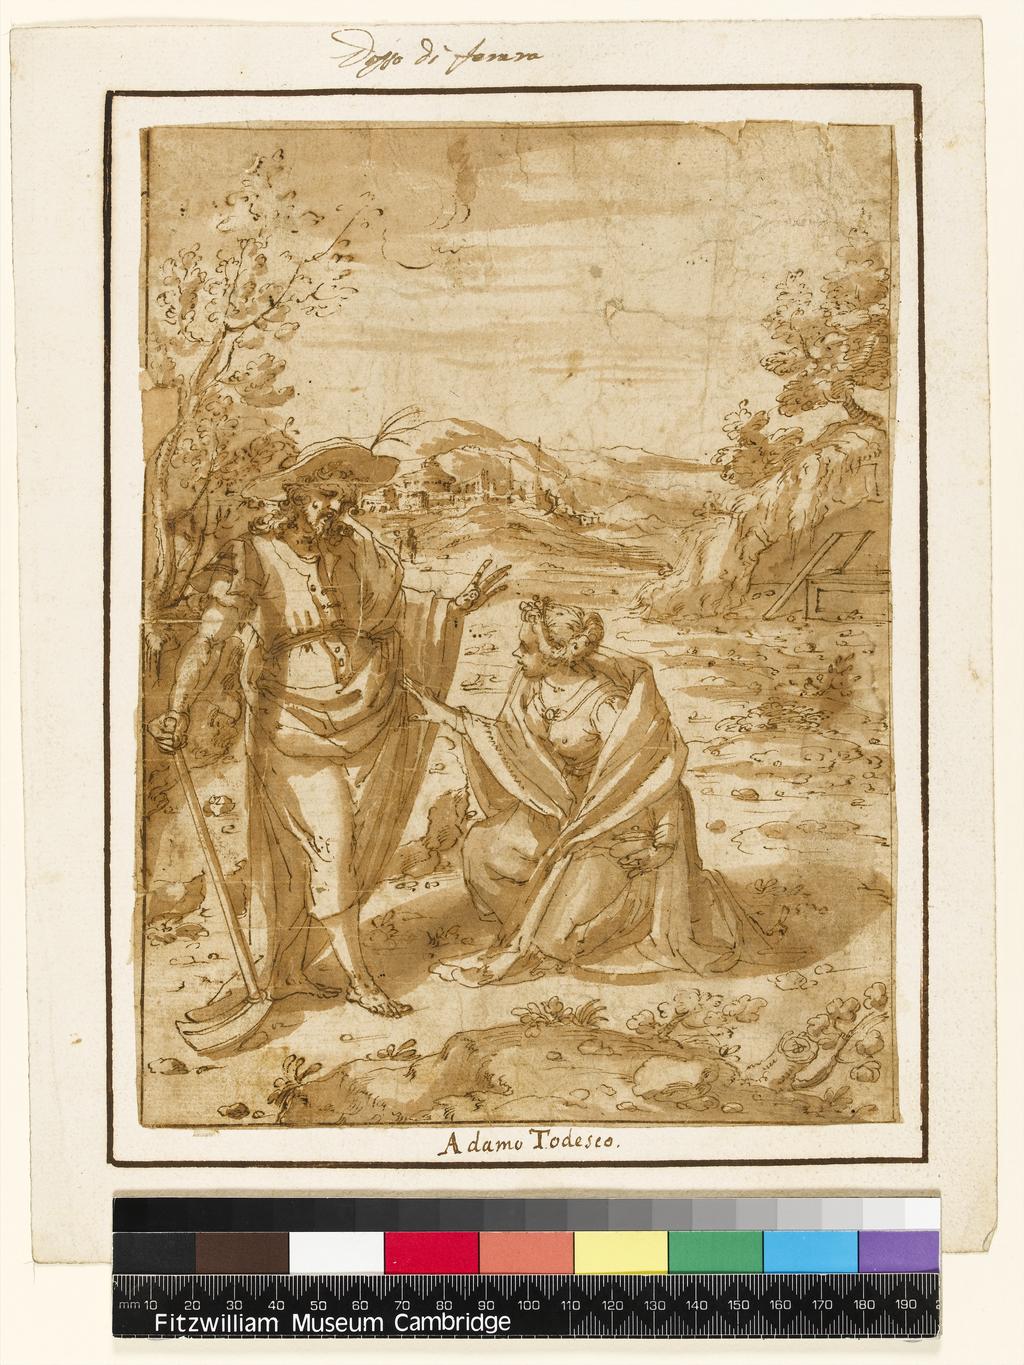 An image of Title/s: Noli me Tangere Maker/s: Semino, Andrea (draughtsman) [ULAN info: Italian artist, 1525(?)-1595(?)]Technique Description: pen, sepia and wash, on paper Dimensions: height: 240 mm, width: 180 mm